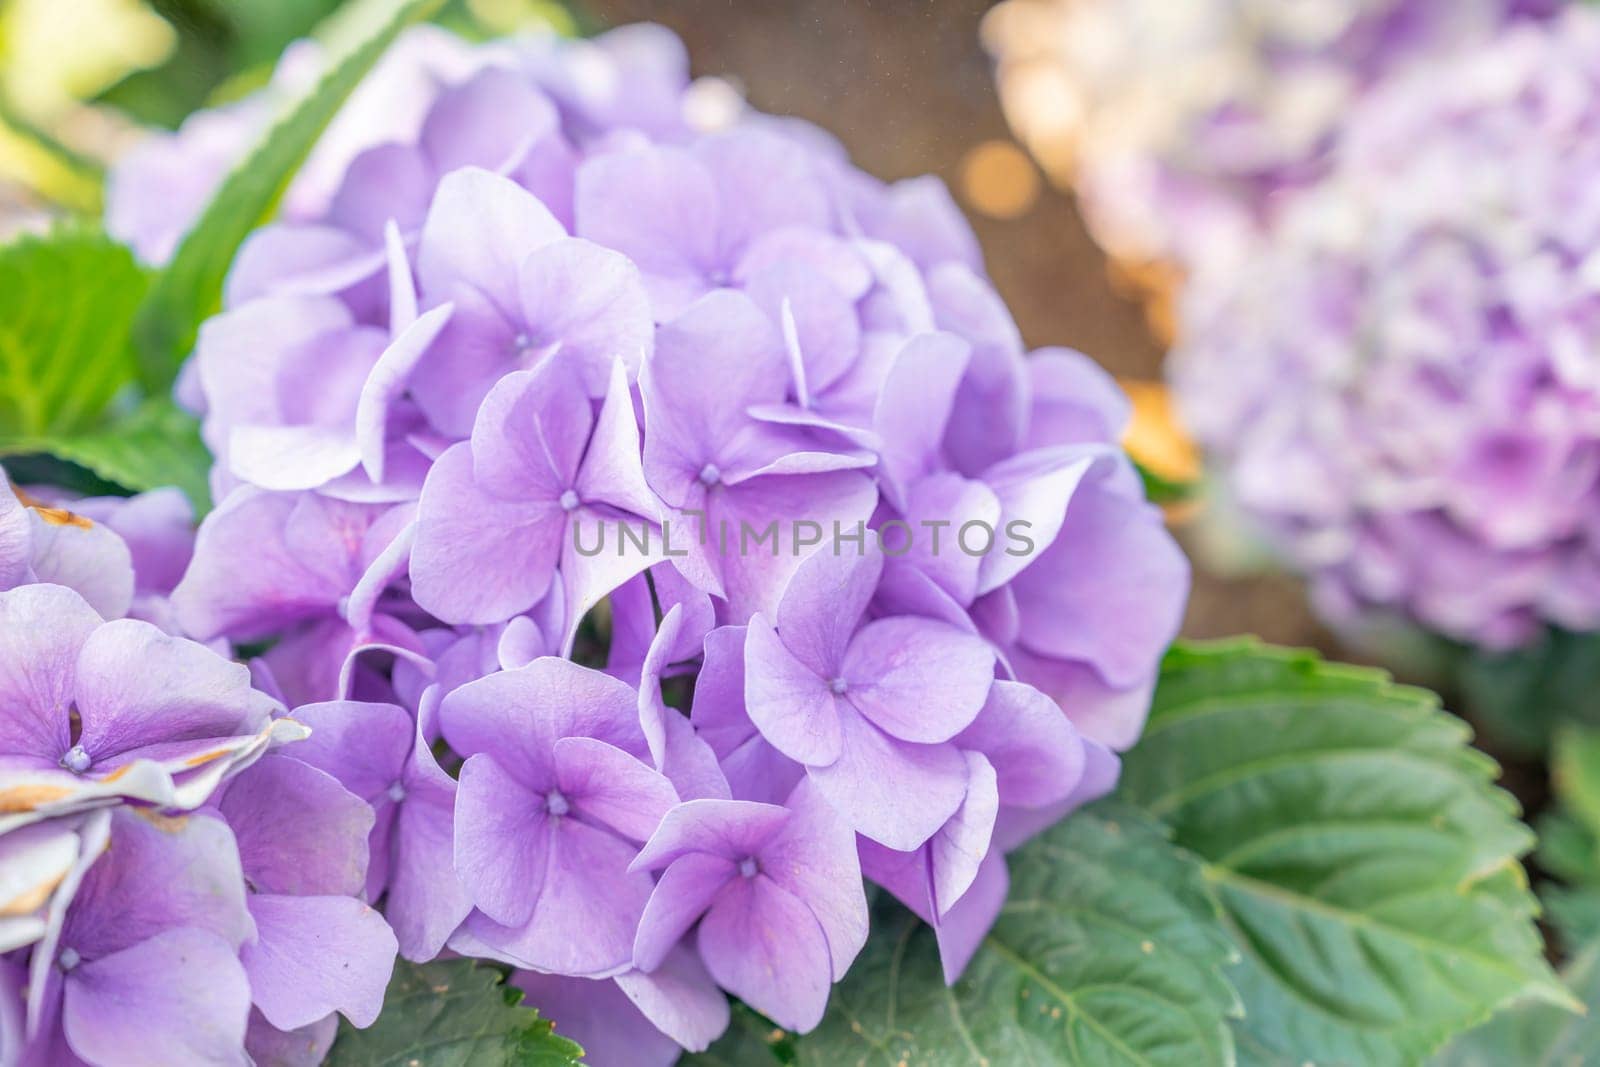 The Blooming lilac and light blue hydrangea flowers. Close up photo of beautiful flowers in garden. by Gamjai